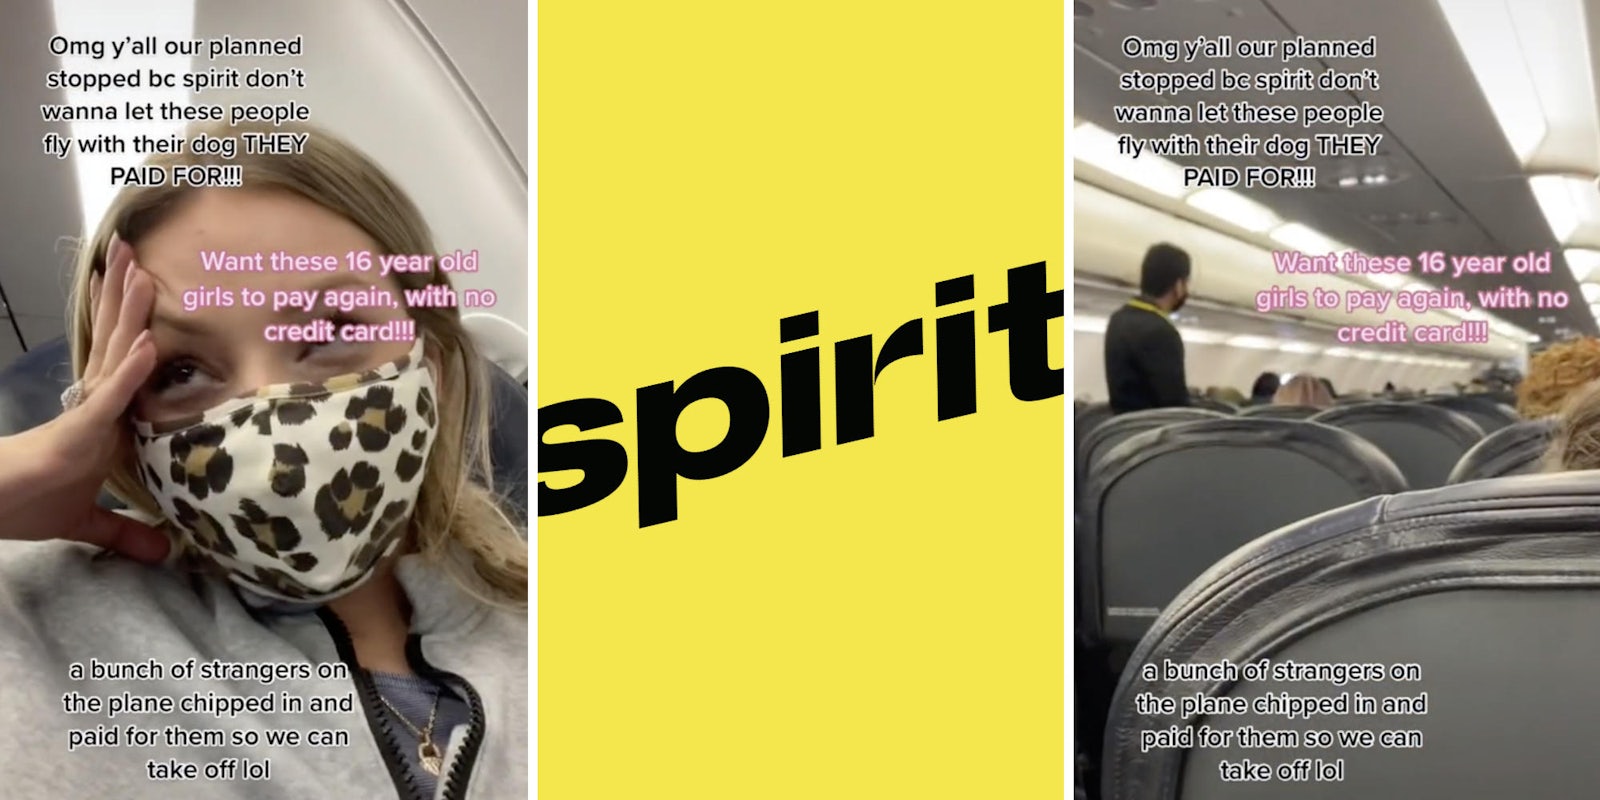 teenager looking annoyed (l) spirit airlines logo (m) passengers on airplane (r)